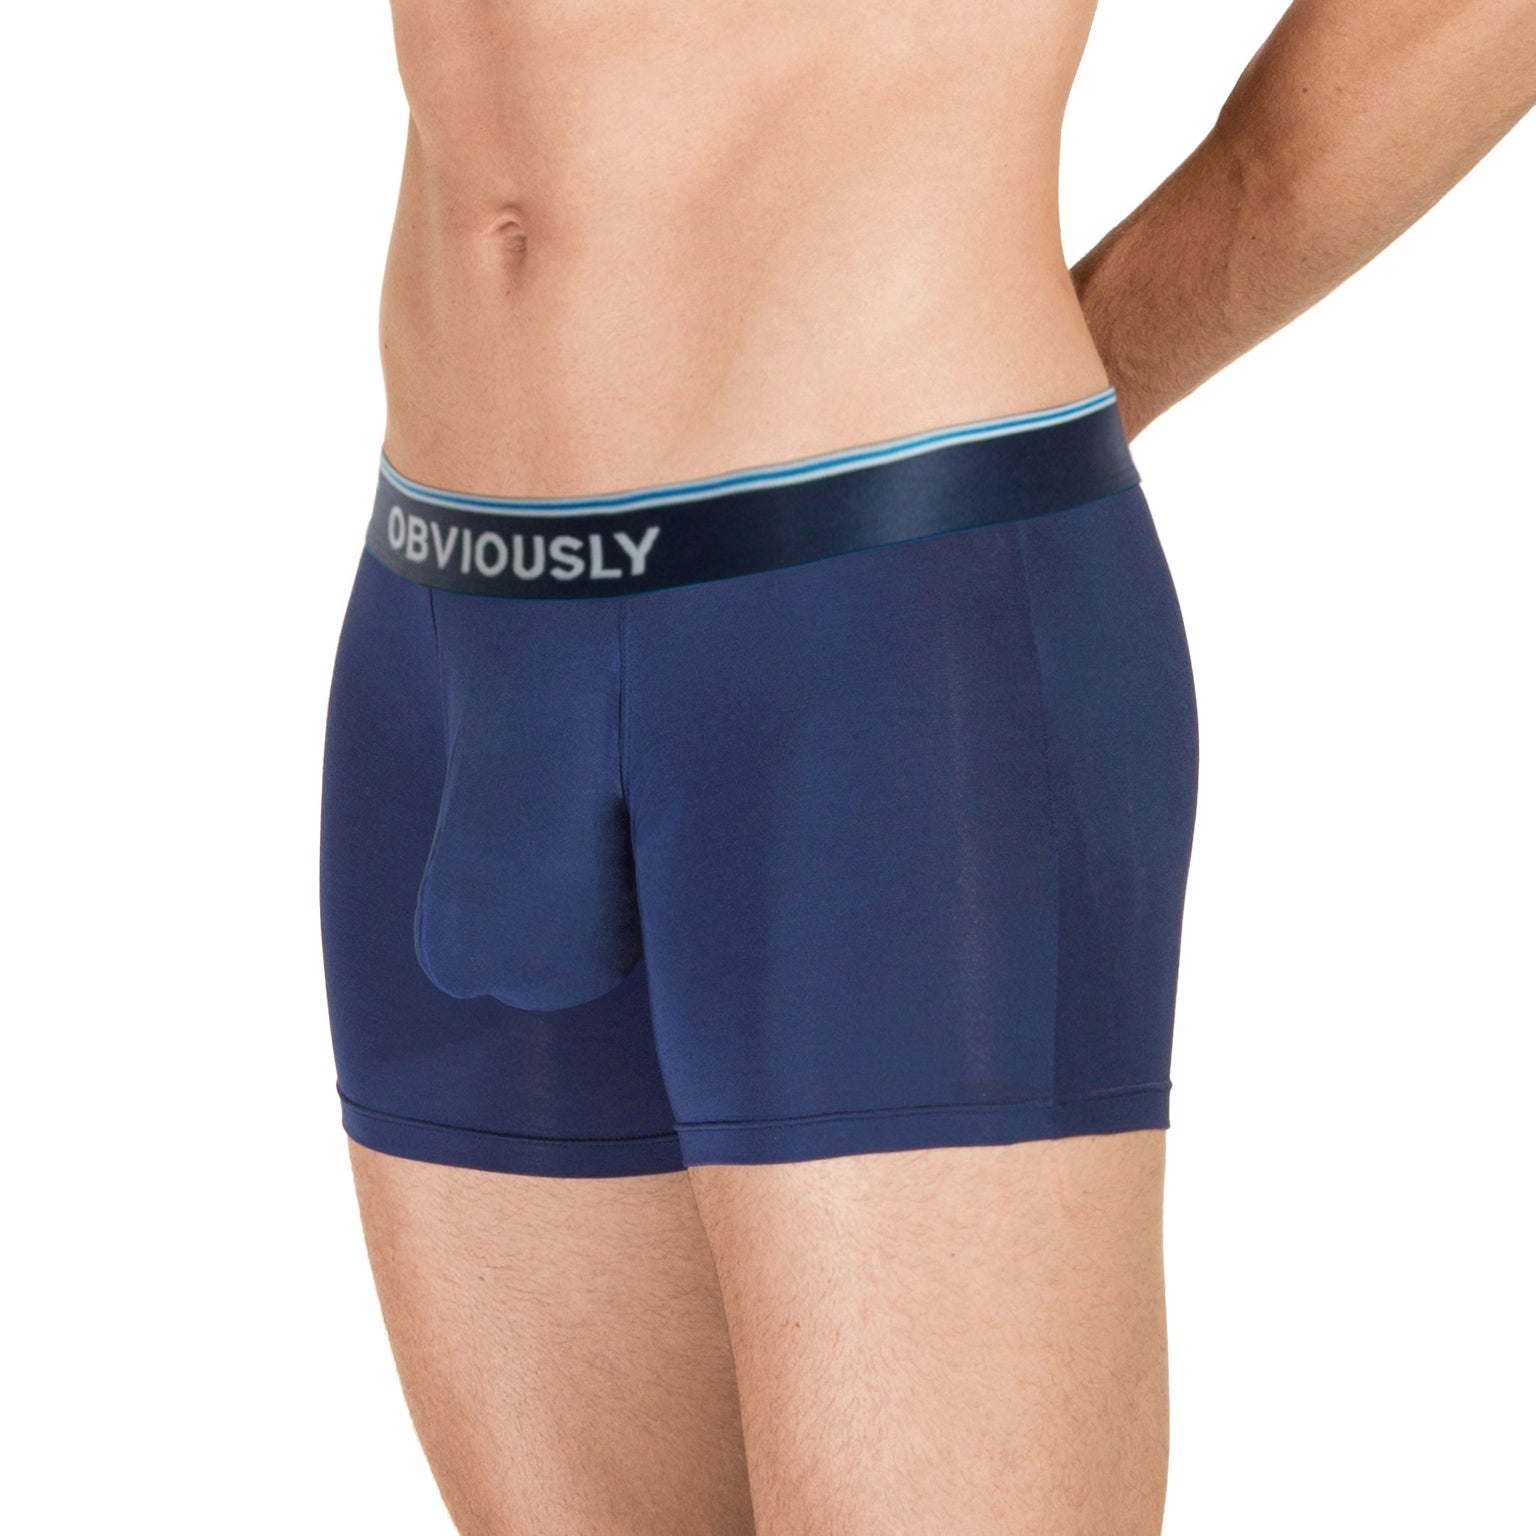 Obviously Underwear - Comfortable Aussie Briefs and Boxers from Topdrawers  Underwear for Men